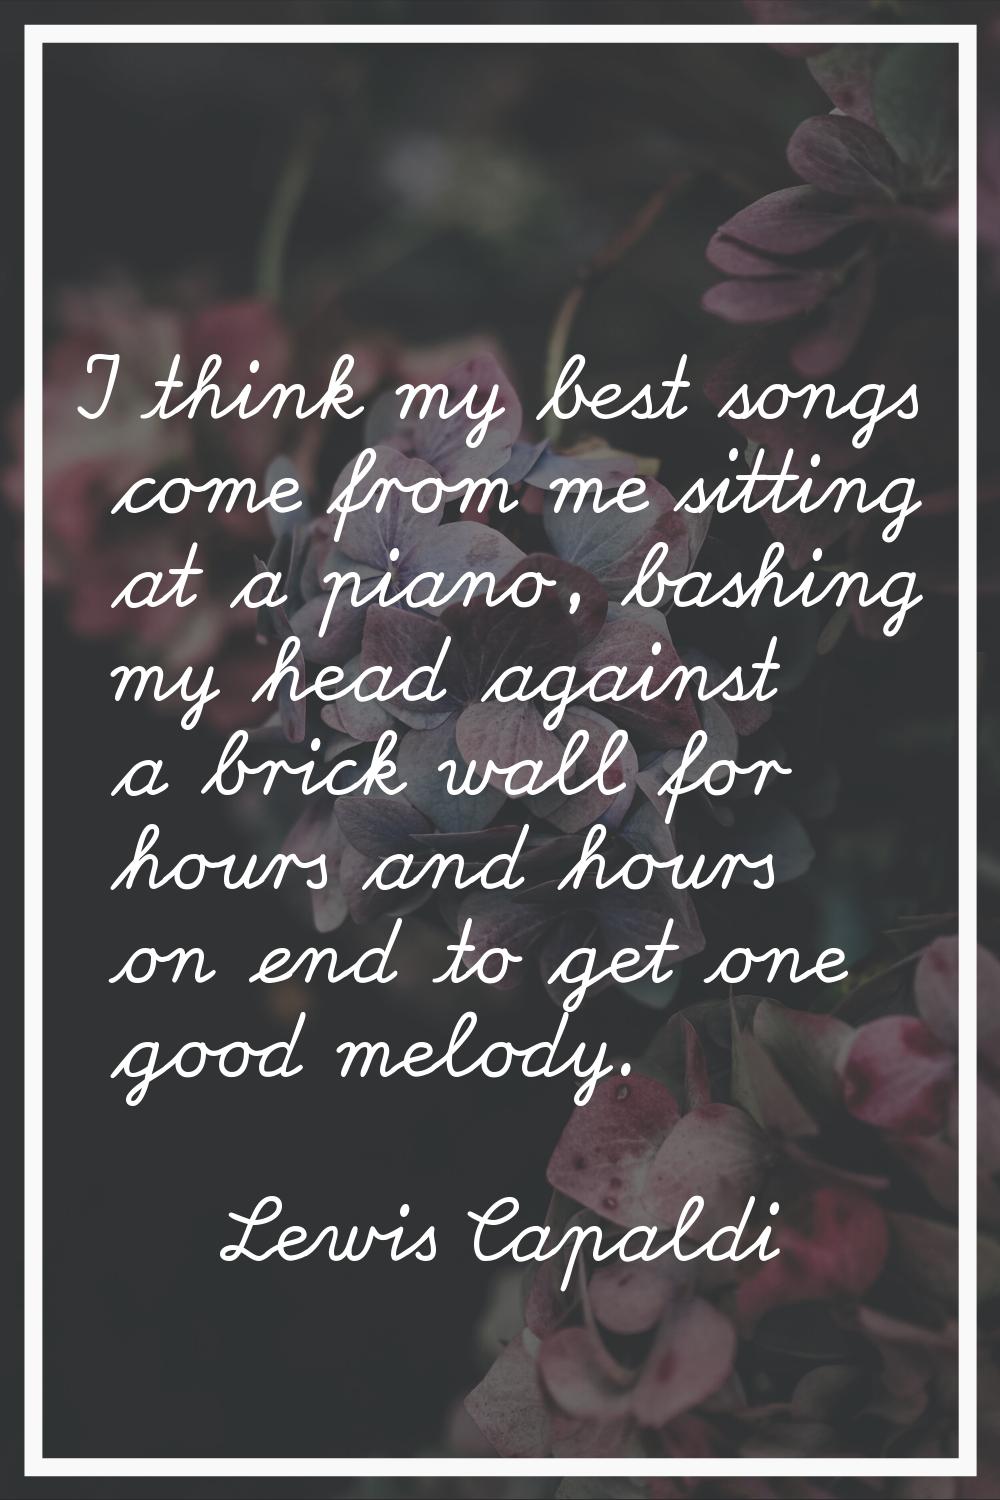 I think my best songs come from me sitting at a piano, bashing my head against a brick wall for hou